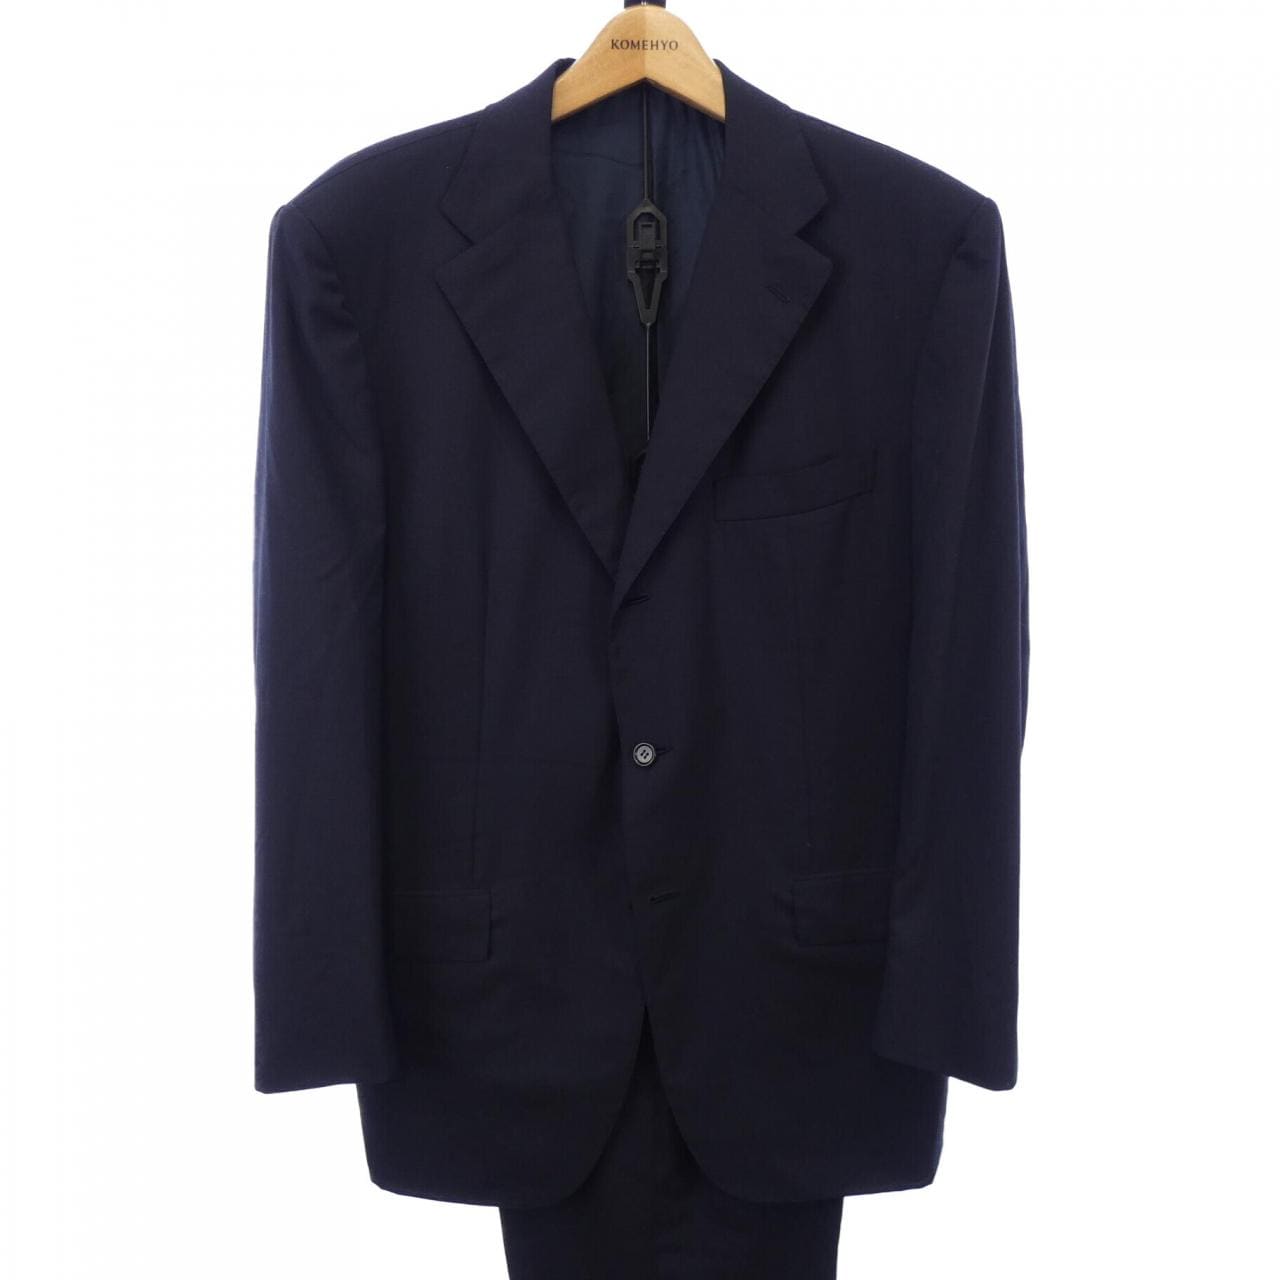 Details more than 145 kiton suits latest